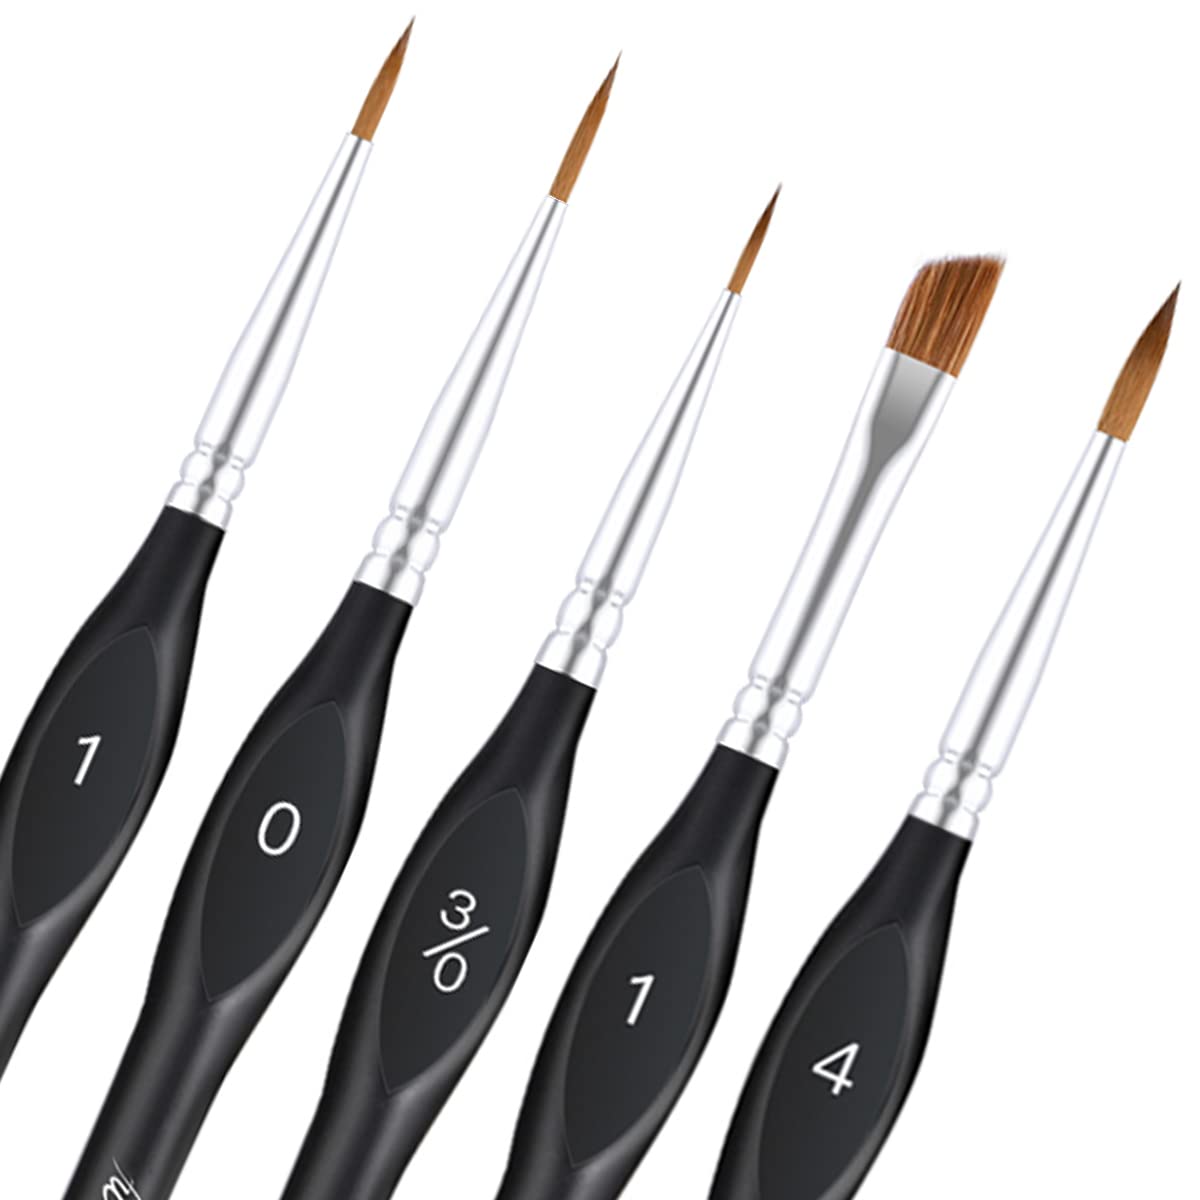  Artist Paint Brushes-Superior Sable Watercolour Brushes Round  Point Tip Paint Brush Set for Watercolor Acrylic Painting Supplies